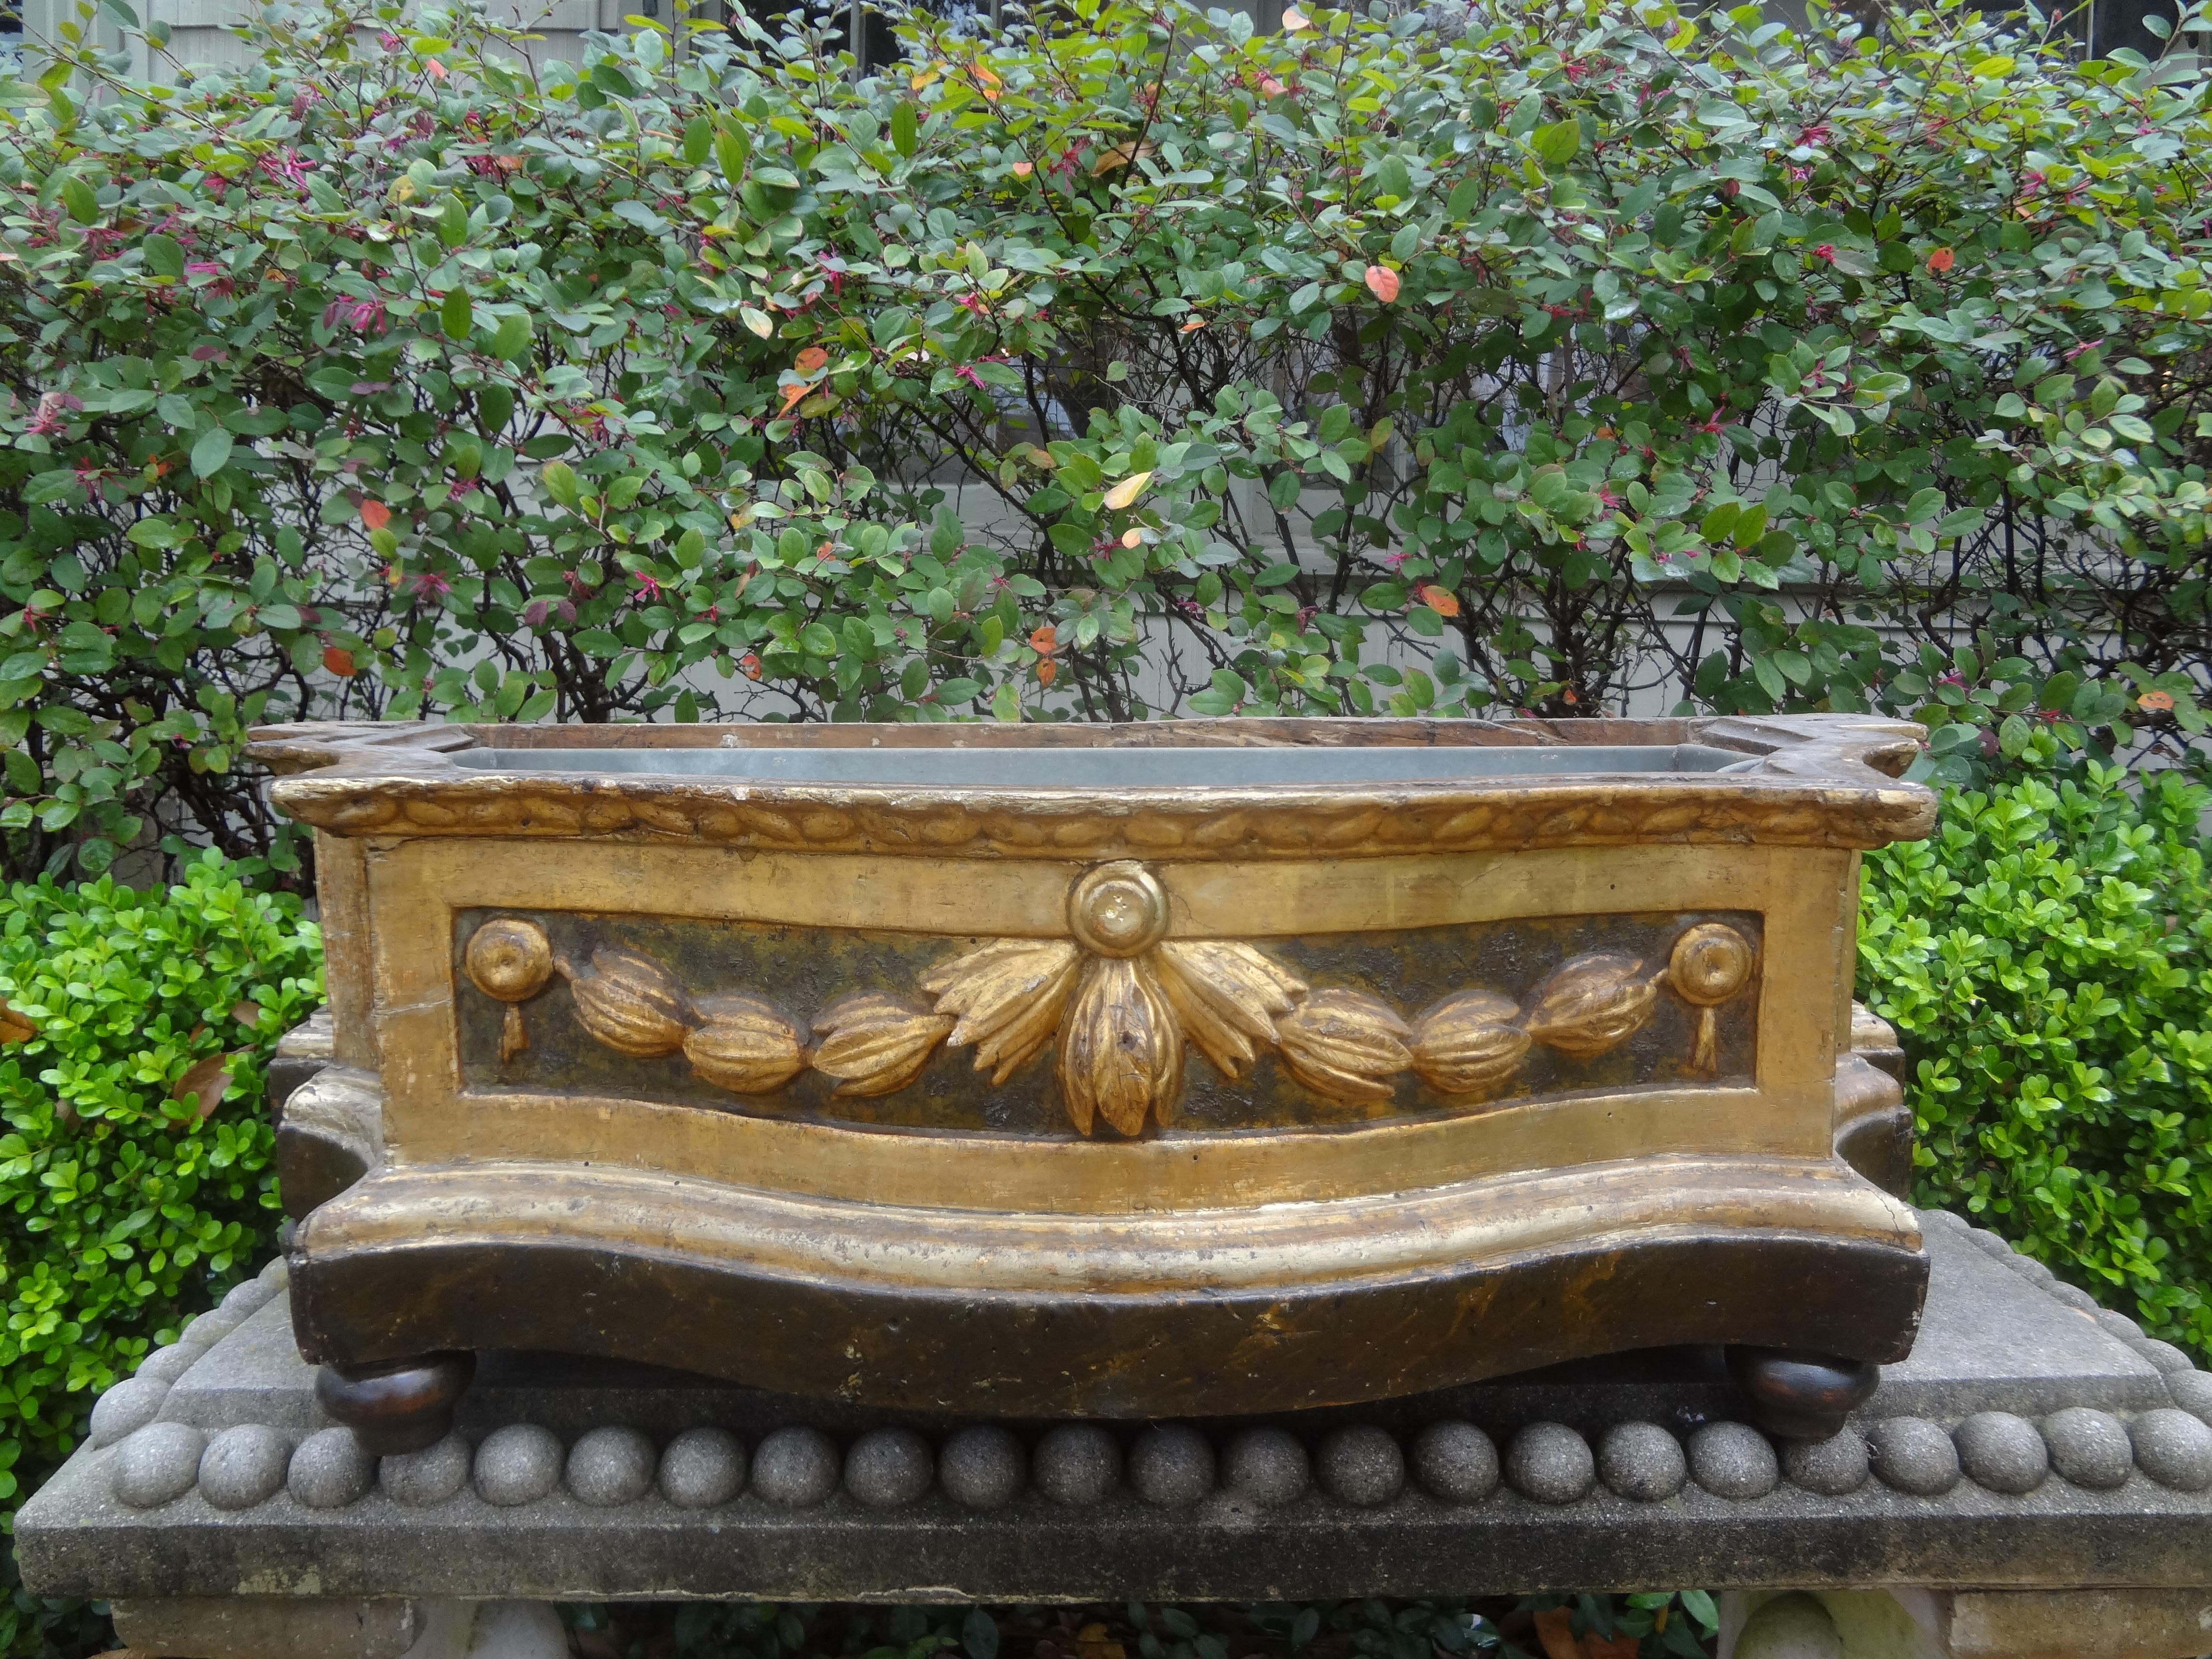 19th century Italian Louis XVI style carved wood planter.
Our elegant antique Italian Louis XVI style carved painted and parcel gilt planter, jardiniere or cachepot has a lovely draped design and retains
the original metal liner. Perfect dining